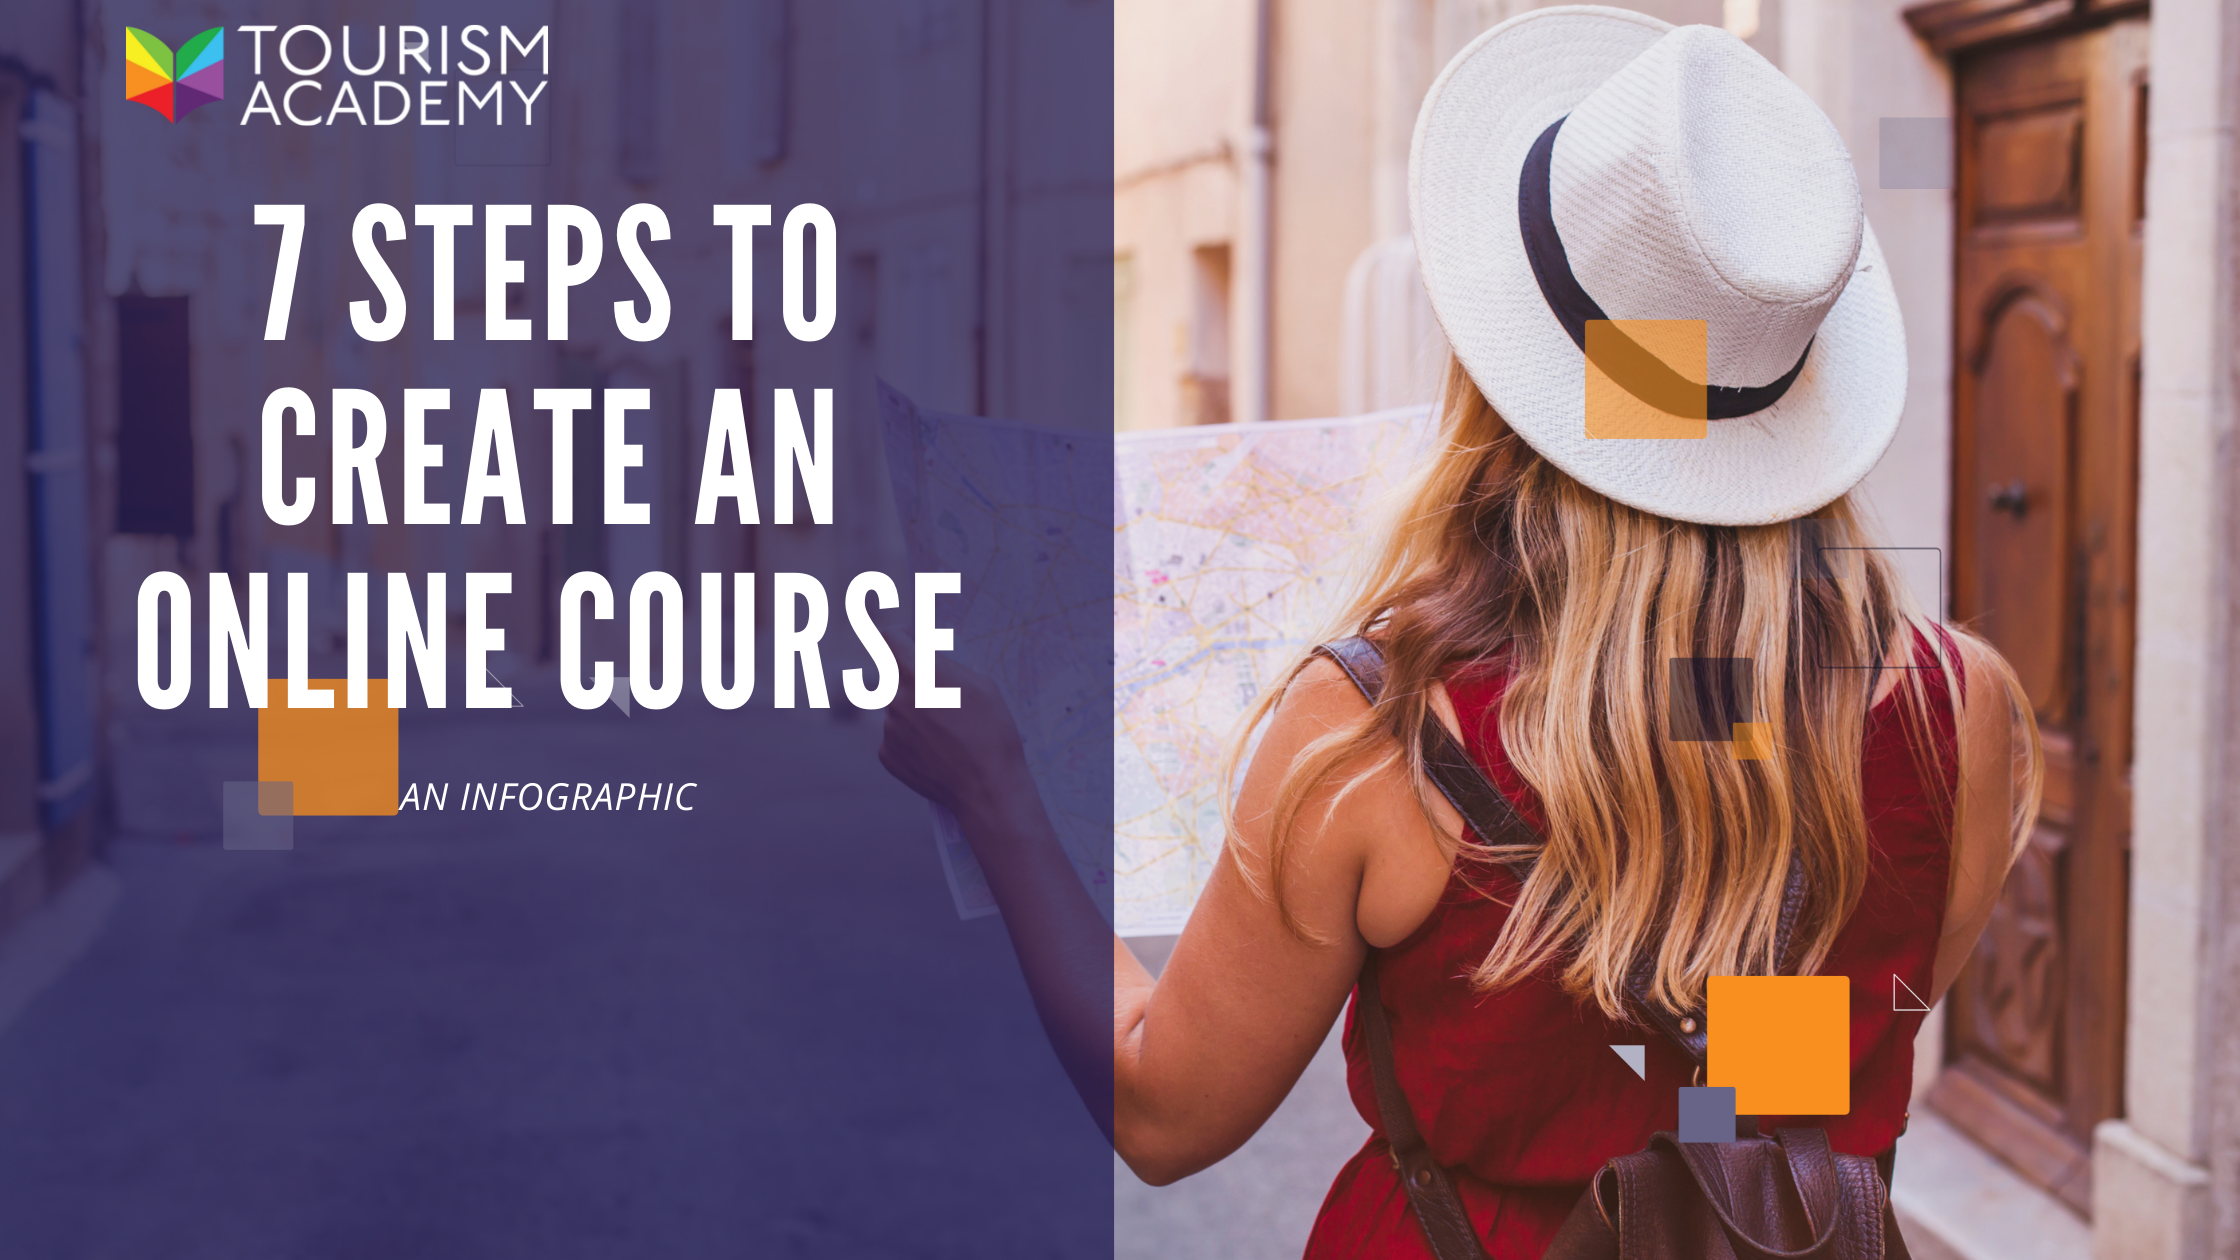 7 steps to create an online course infographic